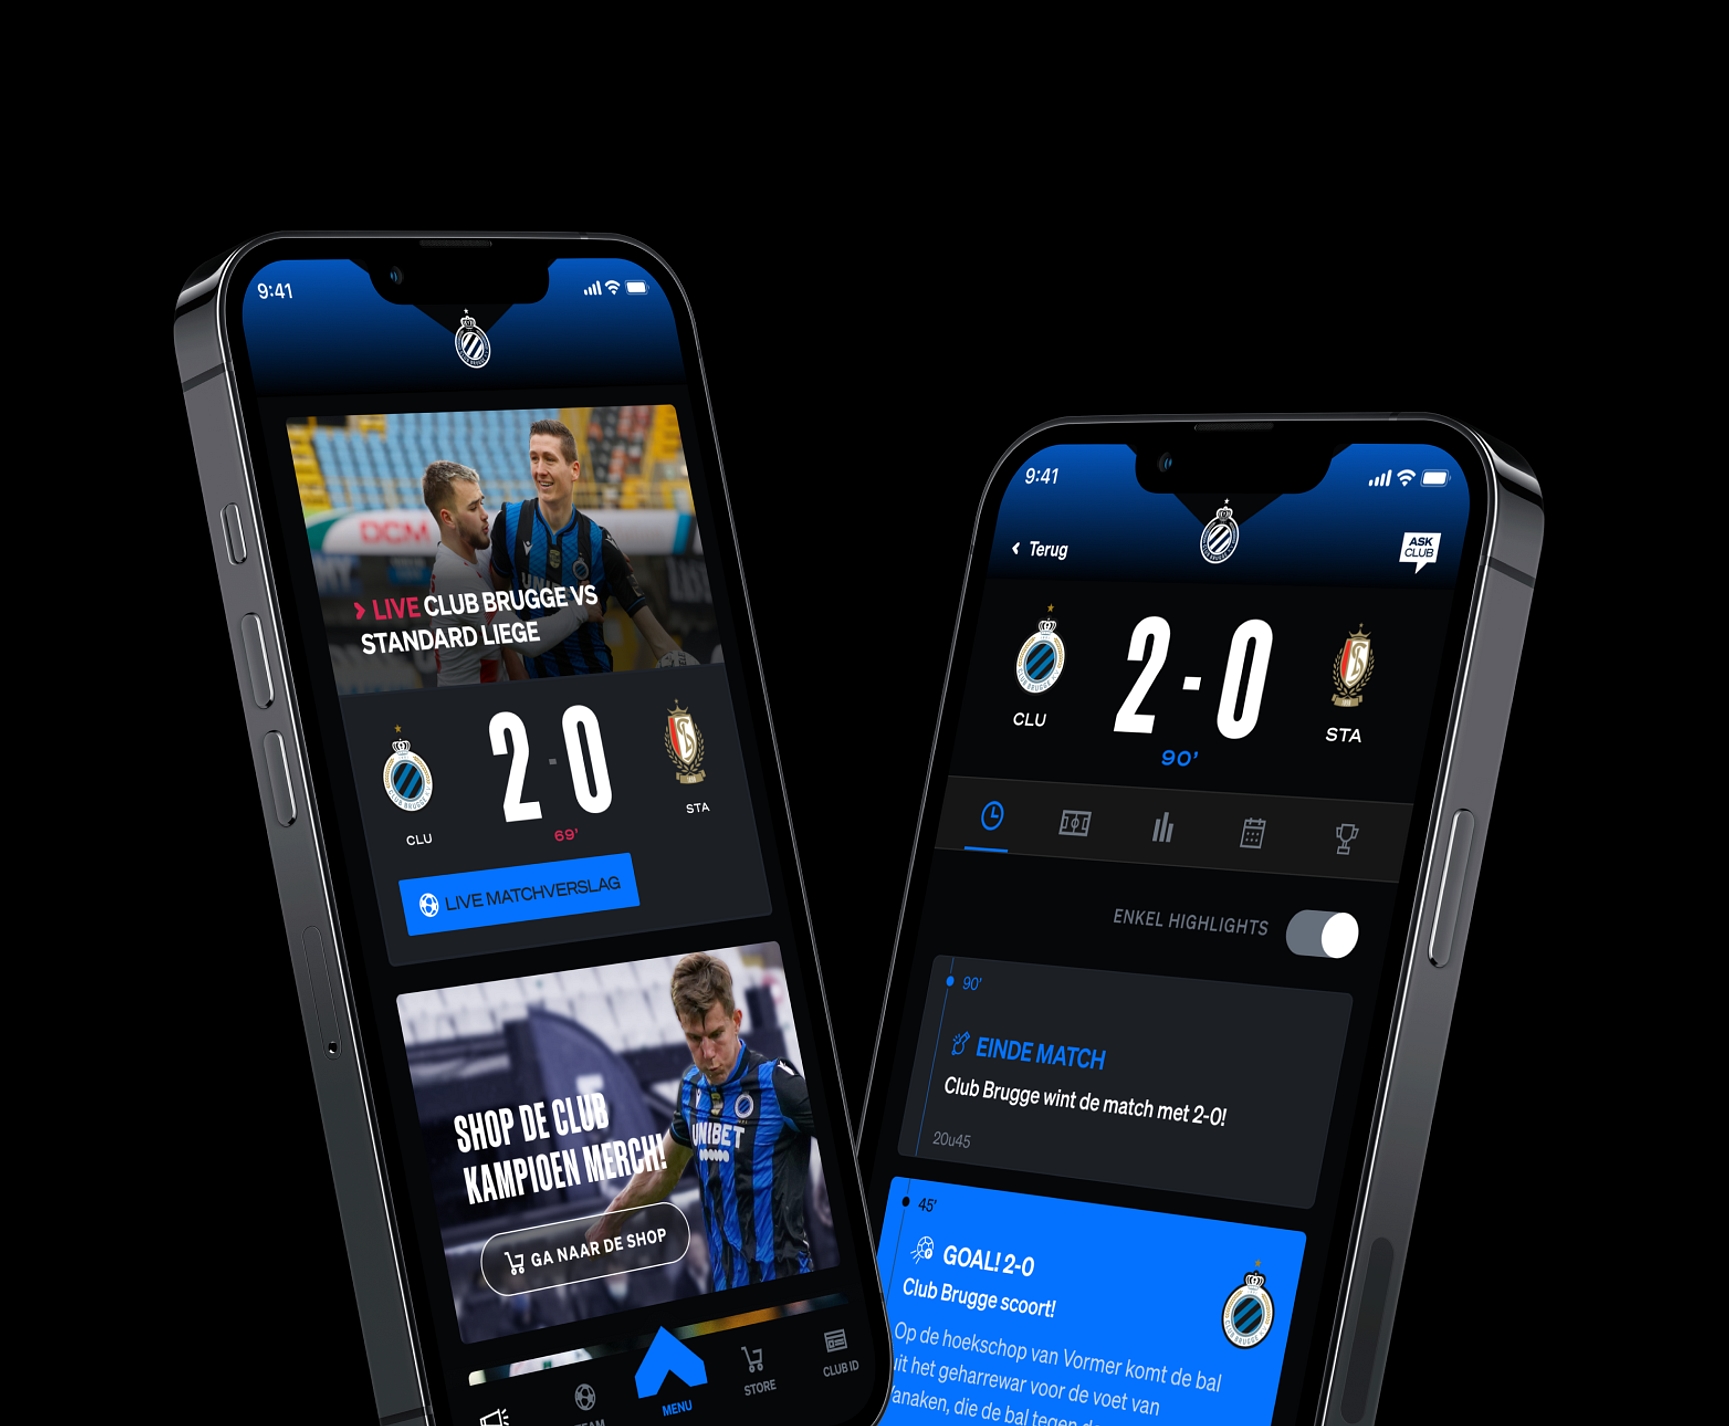 Emphasising user experience with the official Club Brugge fan app